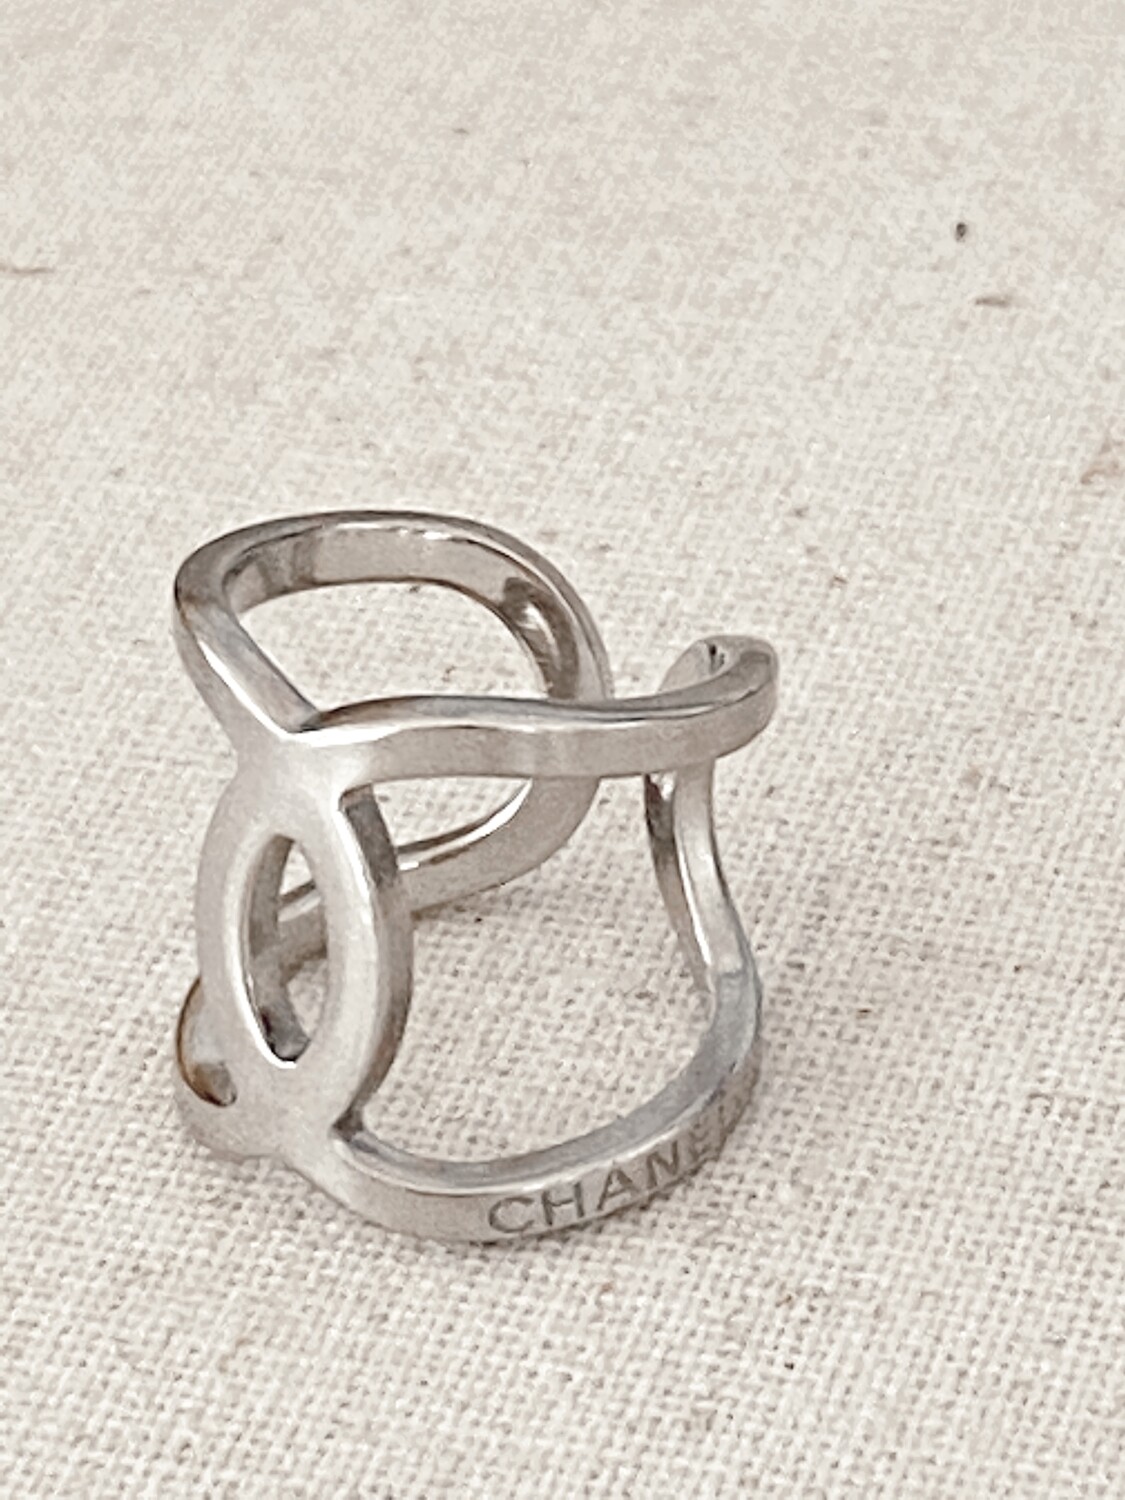 CHANEL LETTERS LARGE CC LOGO SILVER COCKTAIL RING